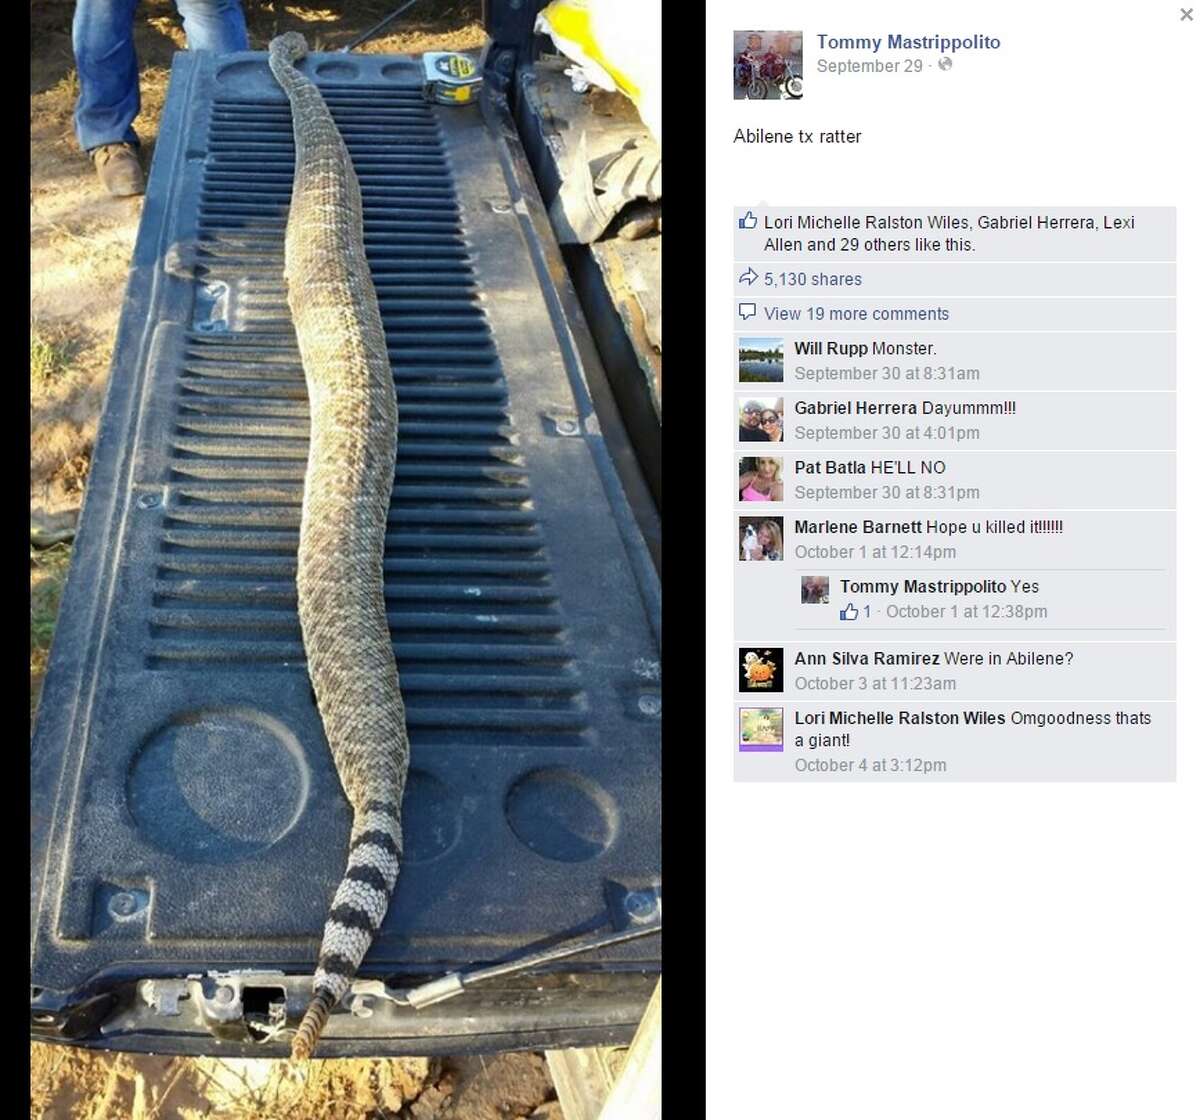 Facebook user Tommy Mastrippolito uploaded this photo of a ginormous rattle snake caught in Abilene on Sept. 29, 2015. According to the photo's comments, the snake had eaten three rats before it was killed.